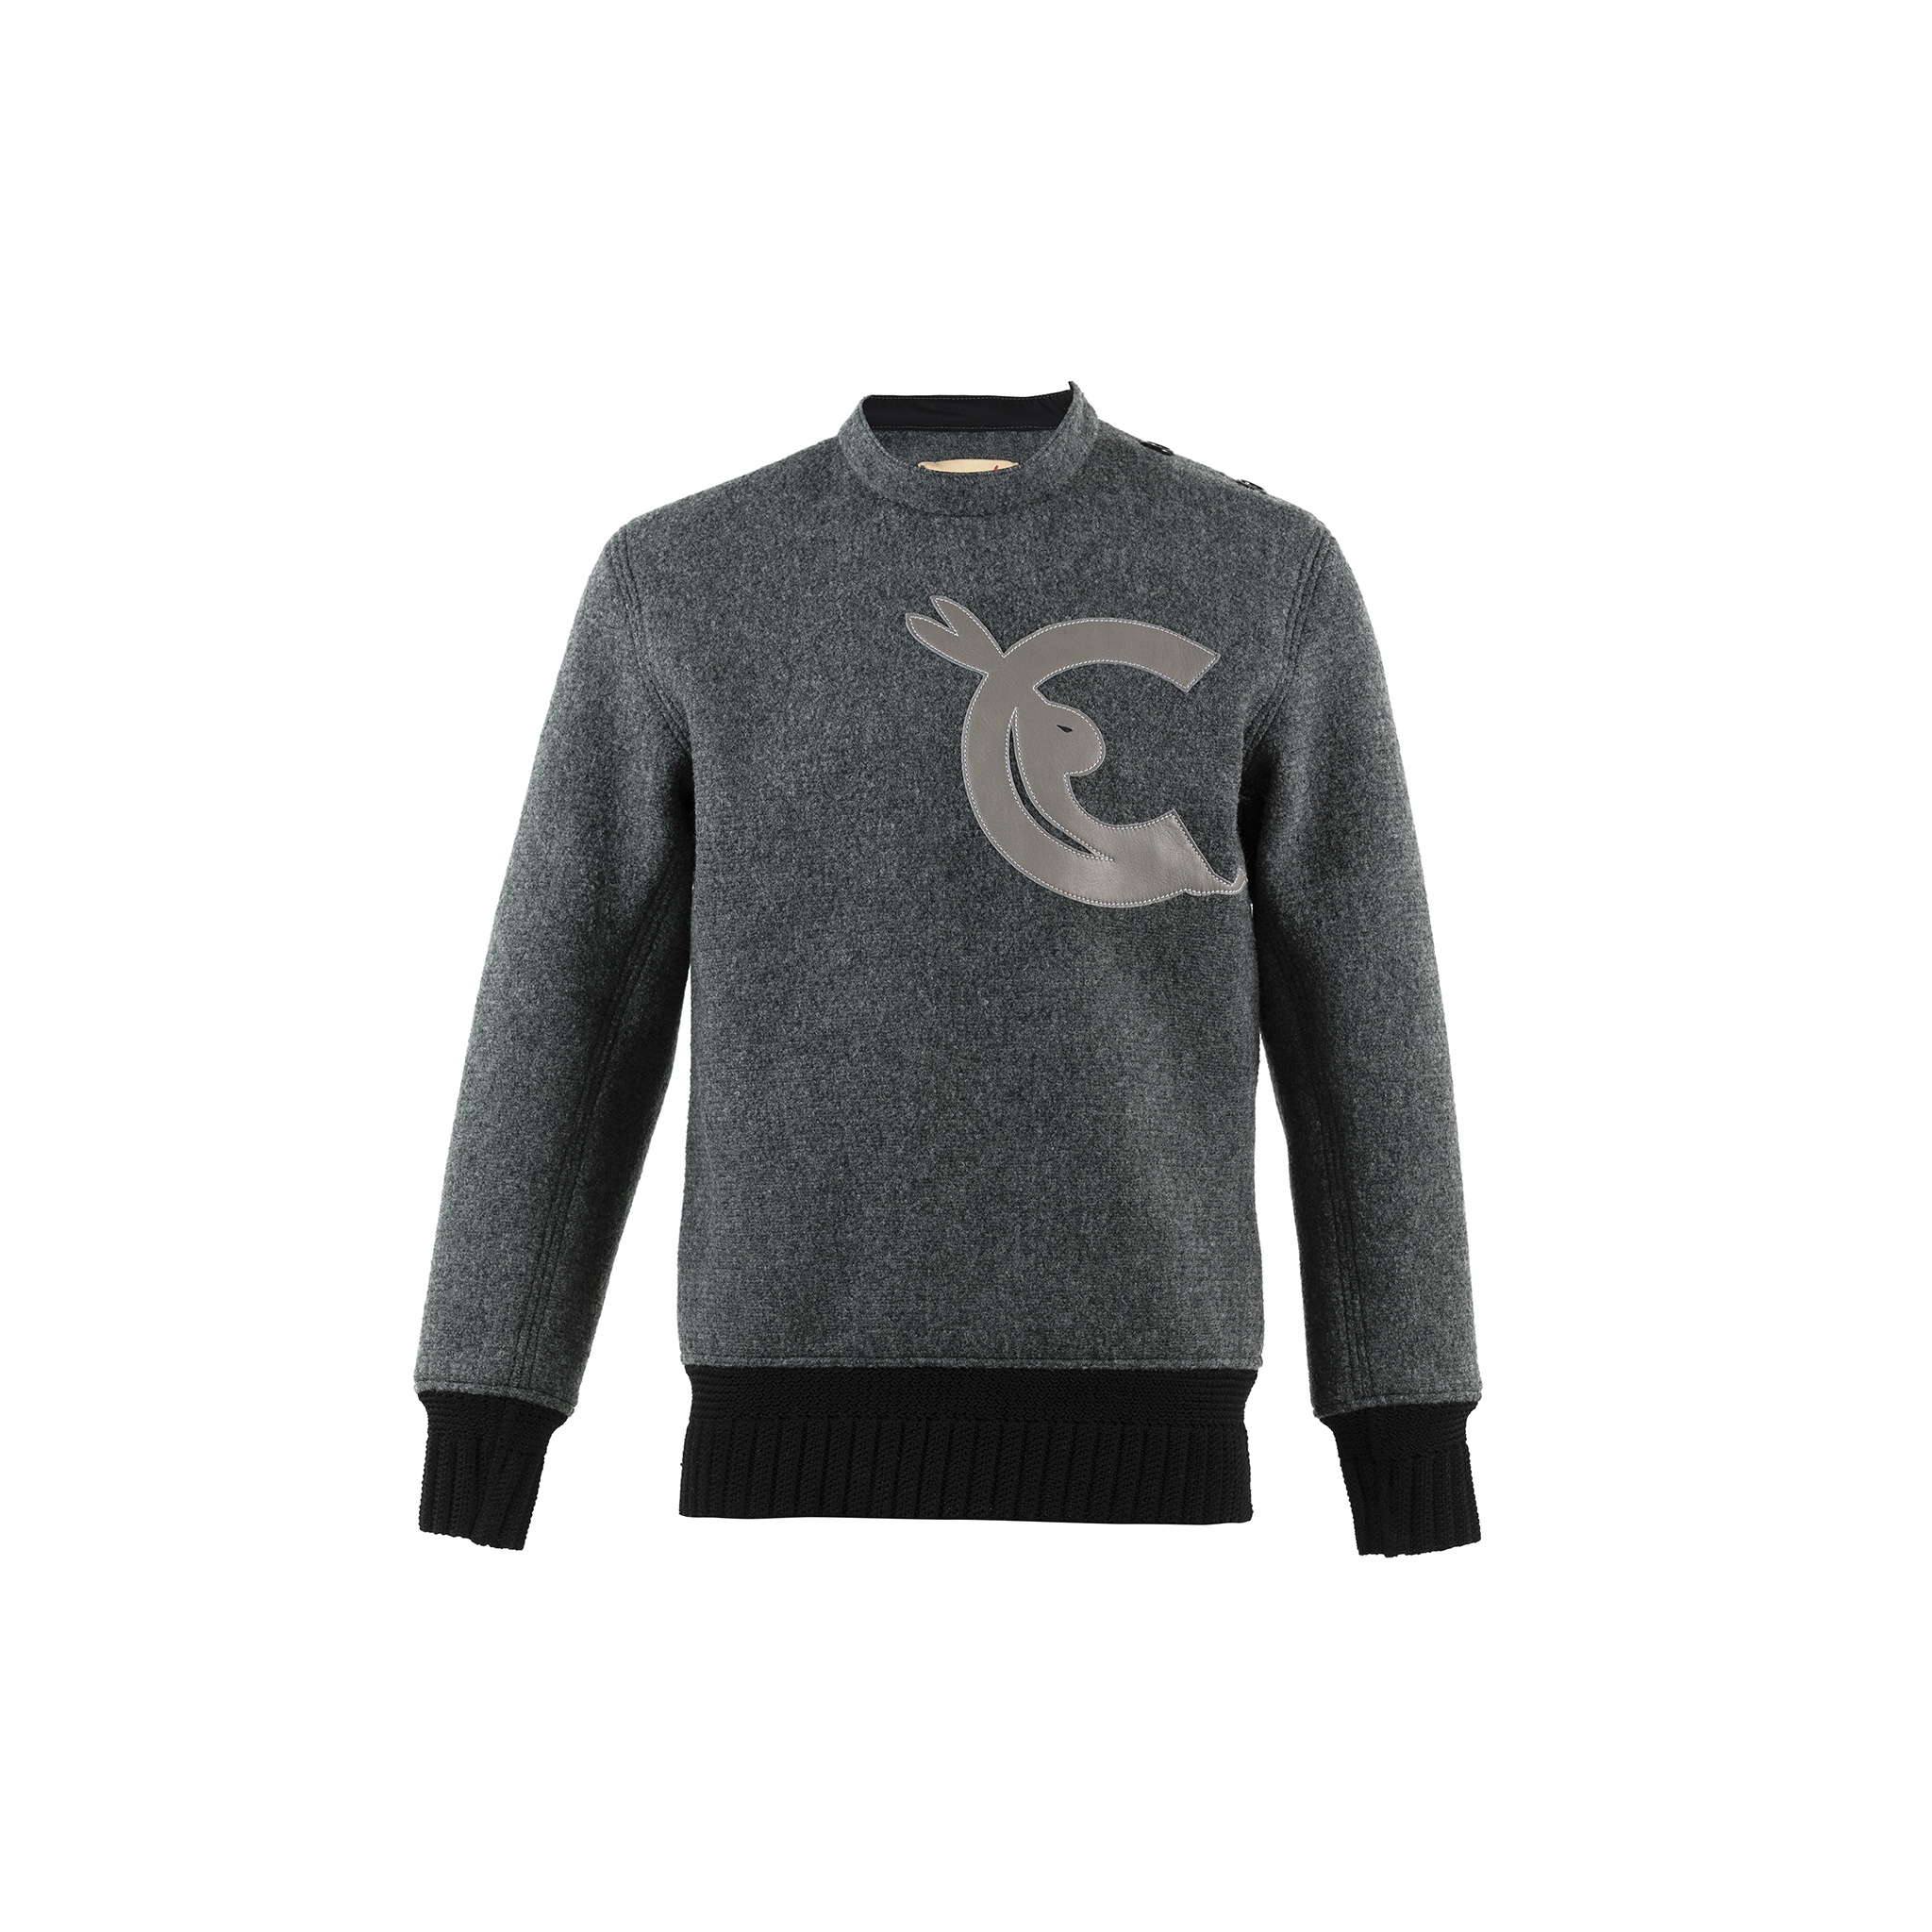 Clair de Lune Jumper - Merino wool and glossy leather - Charcoal grey color